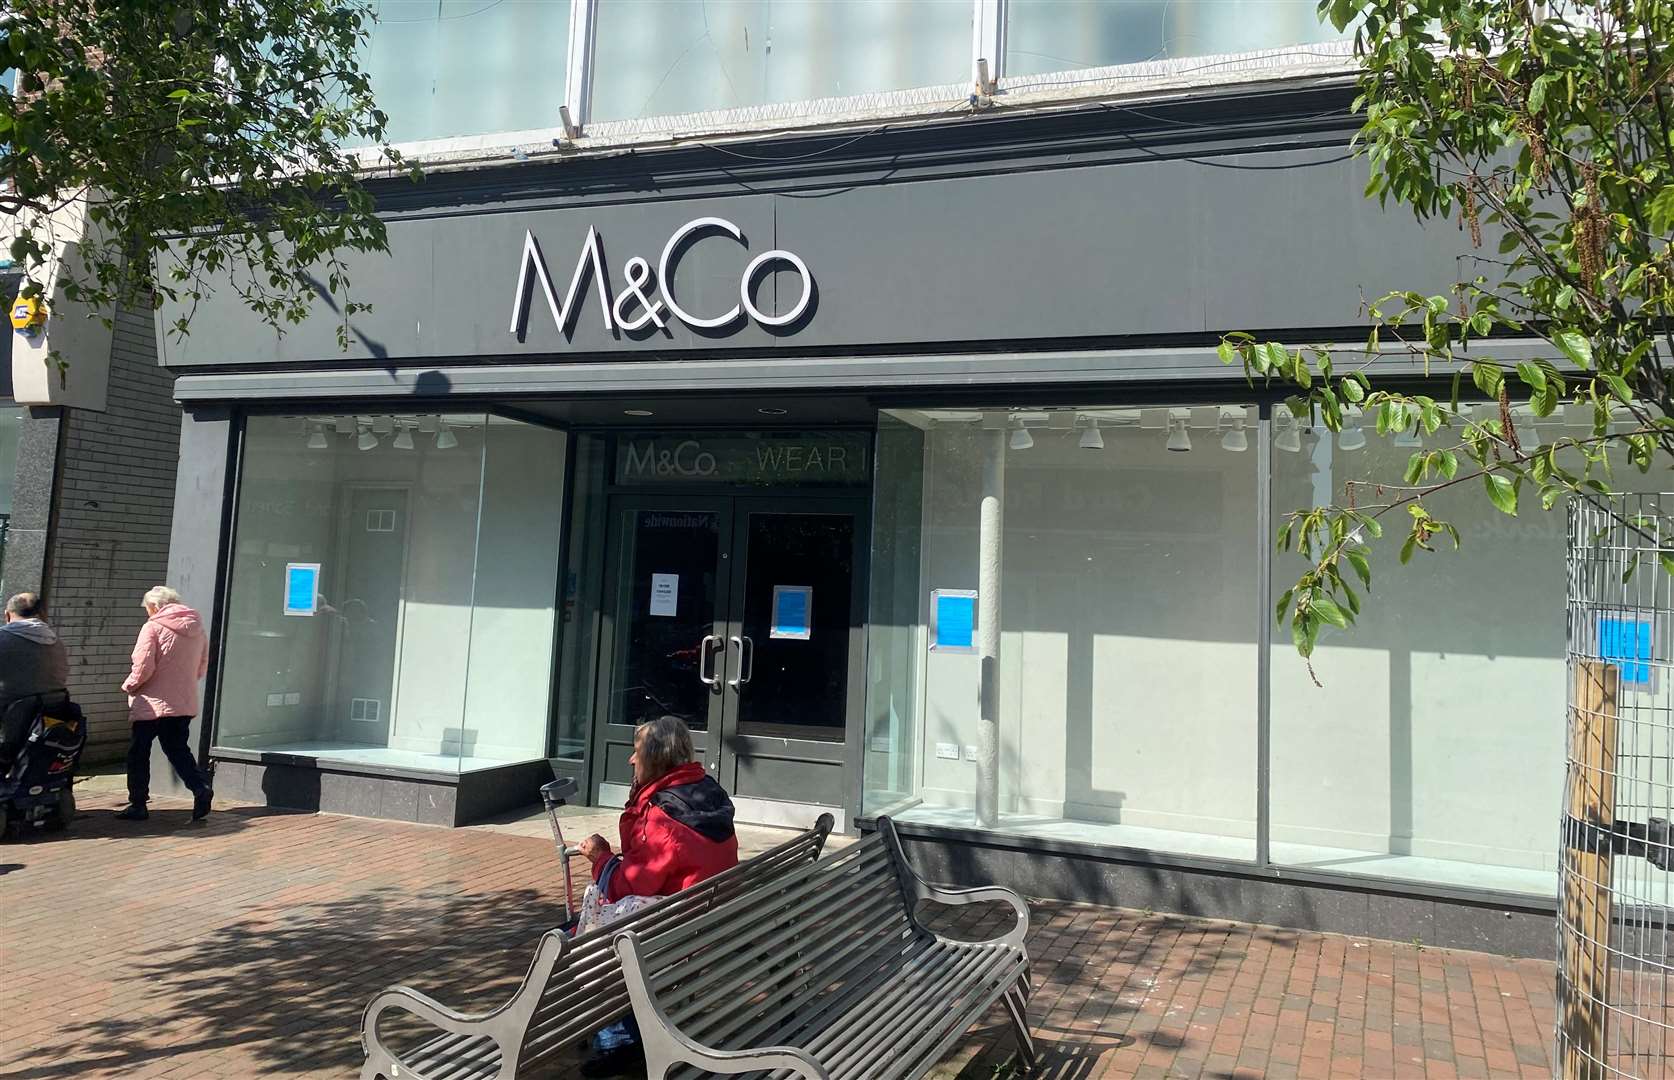 The former M&Co shop, which takes up a prominent position in Deal high street, will be turned into a Lounge bar